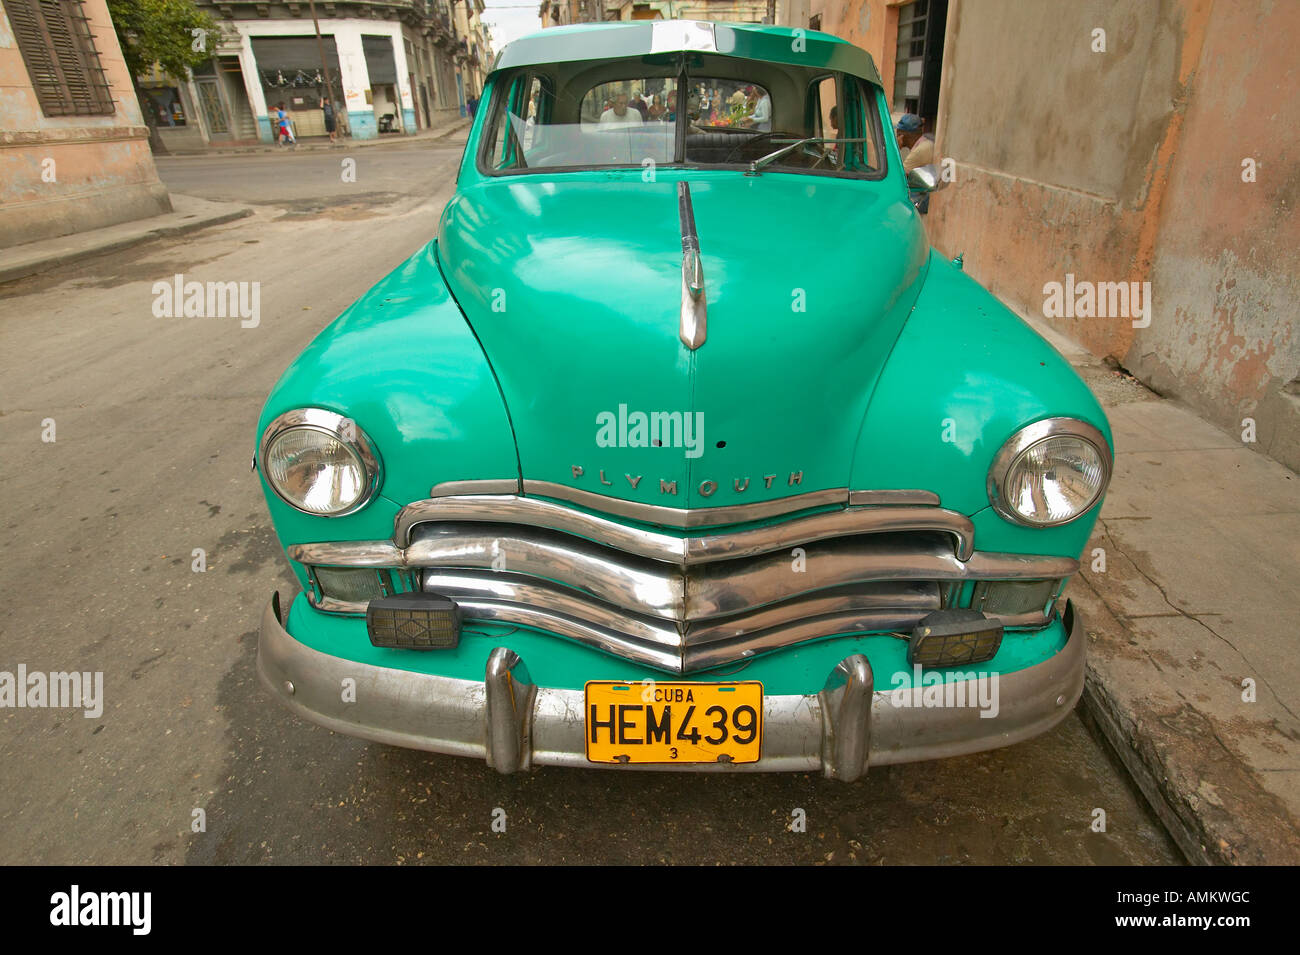 Turquoise old Dodge parked in front of old buildings in Havana Cuba Stock Photo